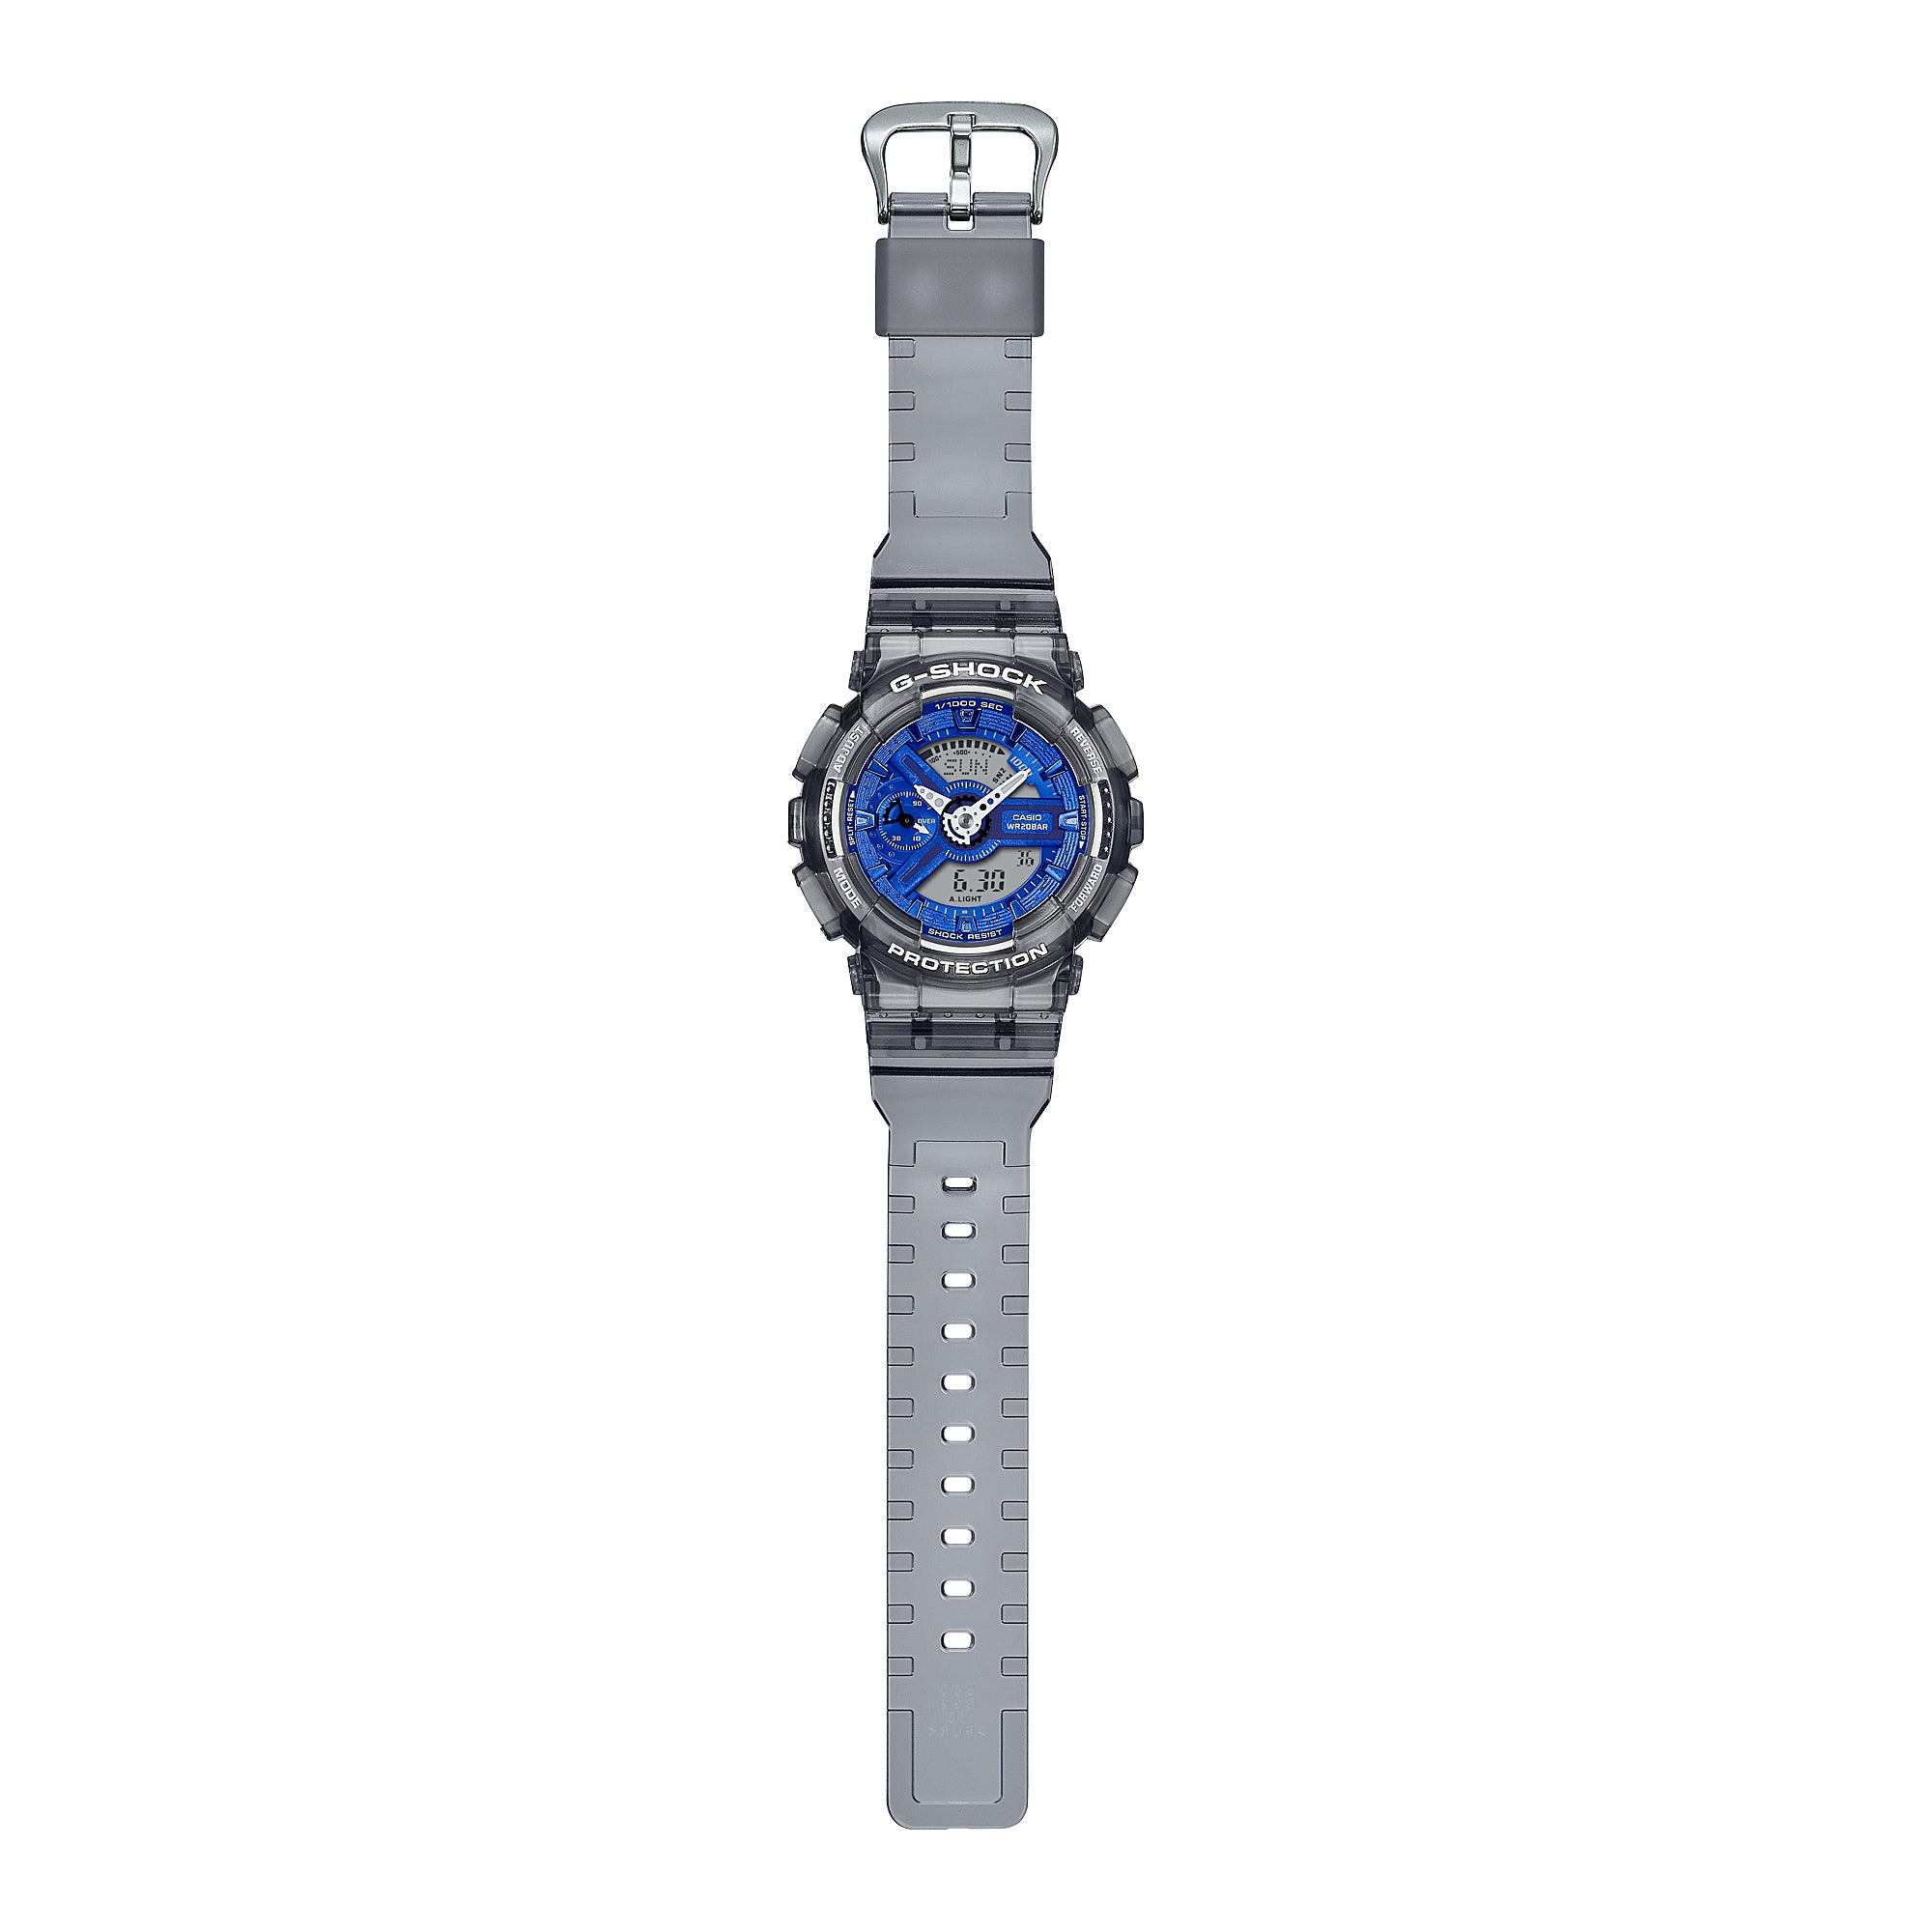 Casio G-Shock for Ladies' Grey Translucent Resin Band Watch GMAS110TB-8A GMA-S110TB-8A